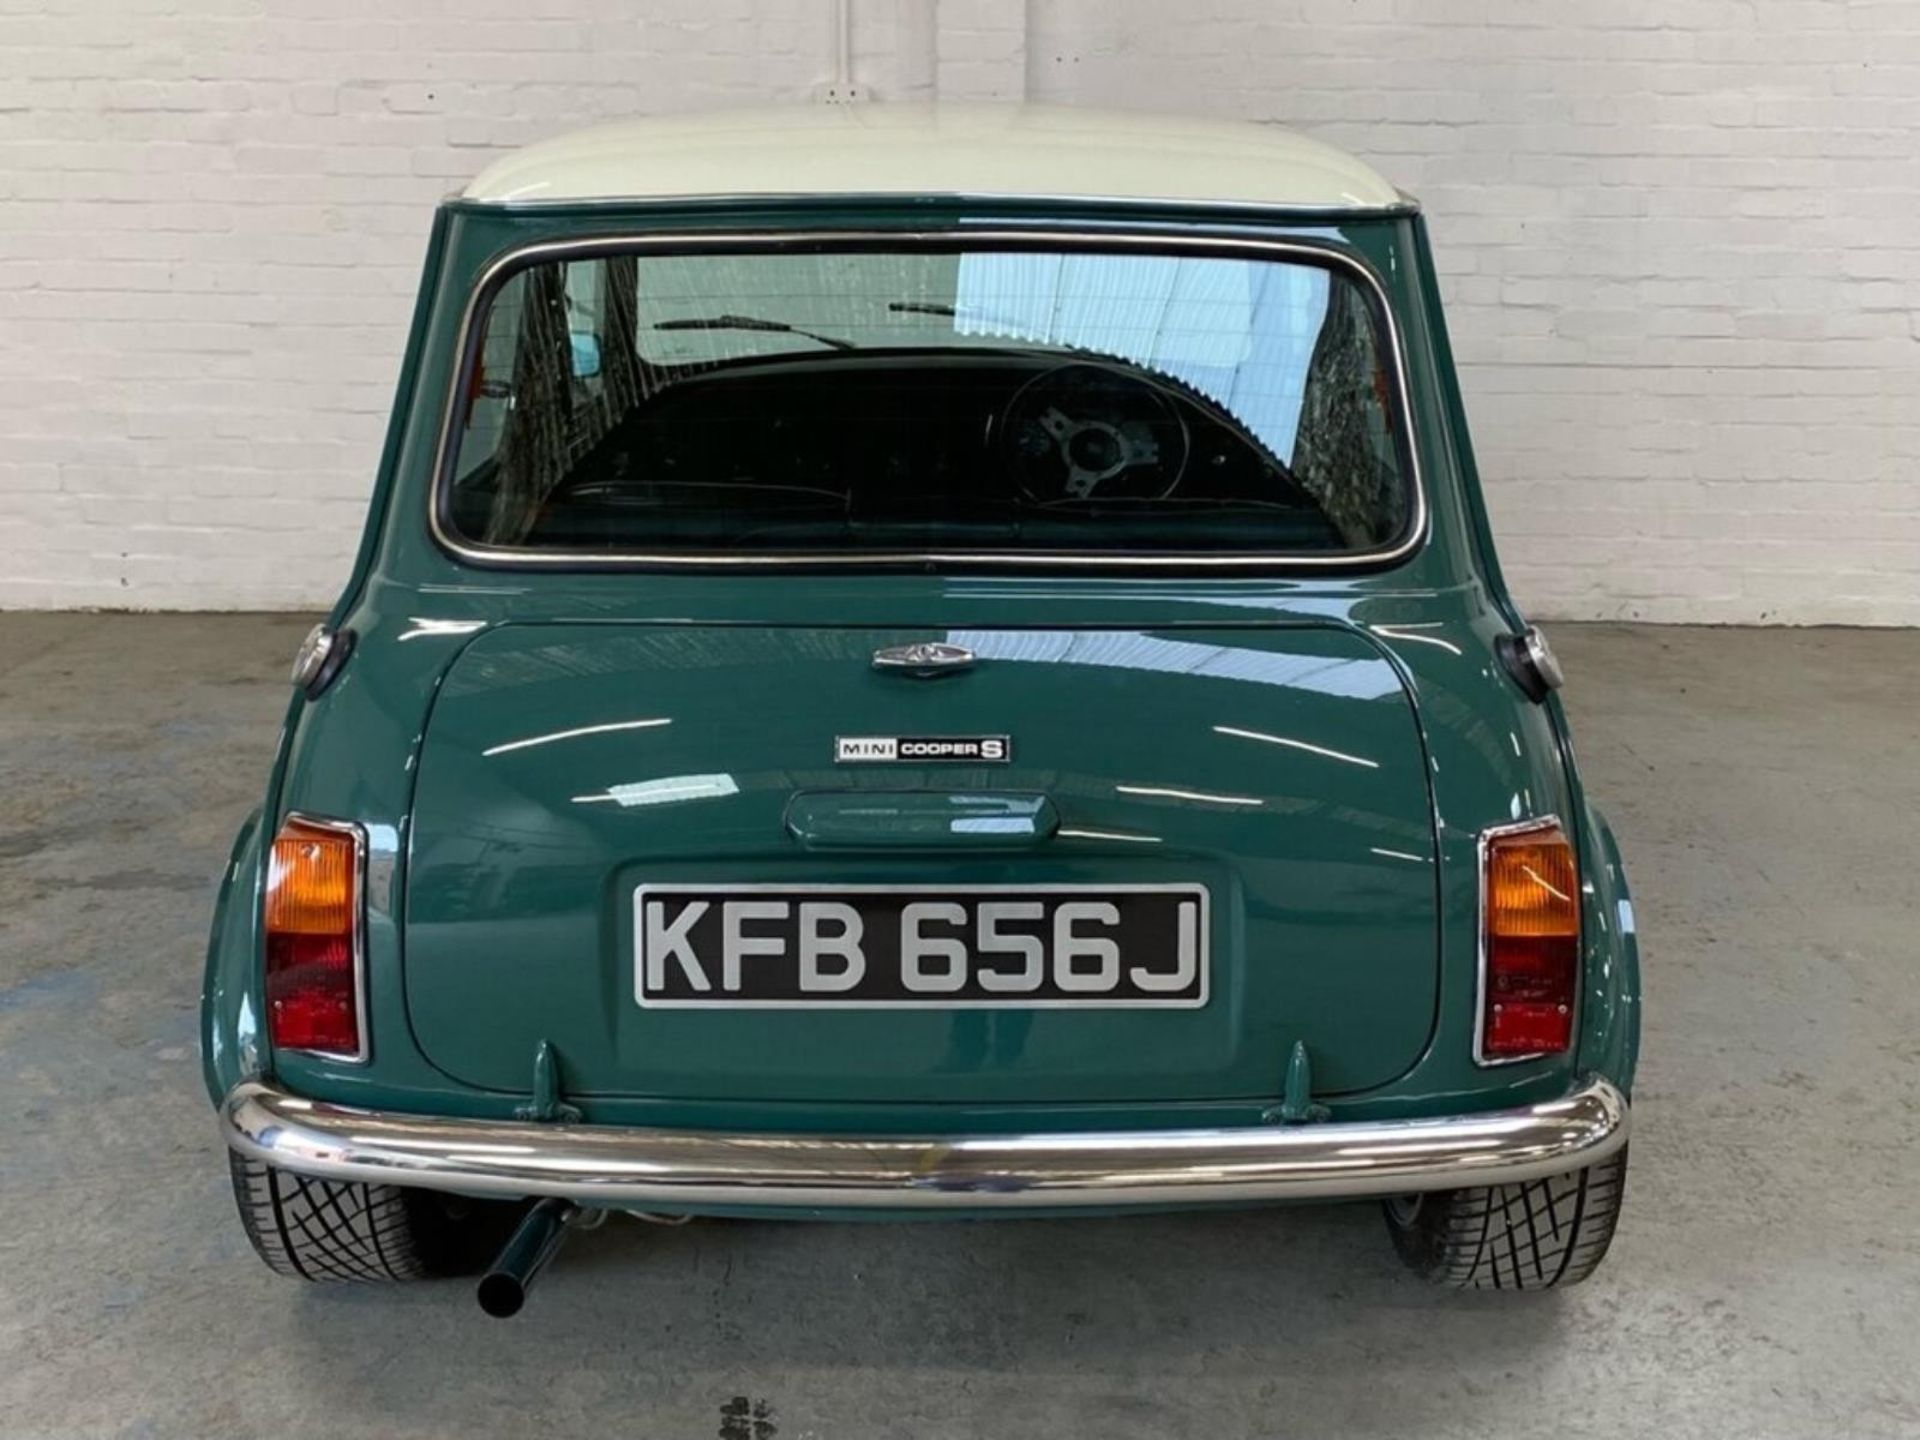 1971 Mini Cooper S Recreation Registration number KFB 656J Green with a white roof Black interior - Image 4 of 18